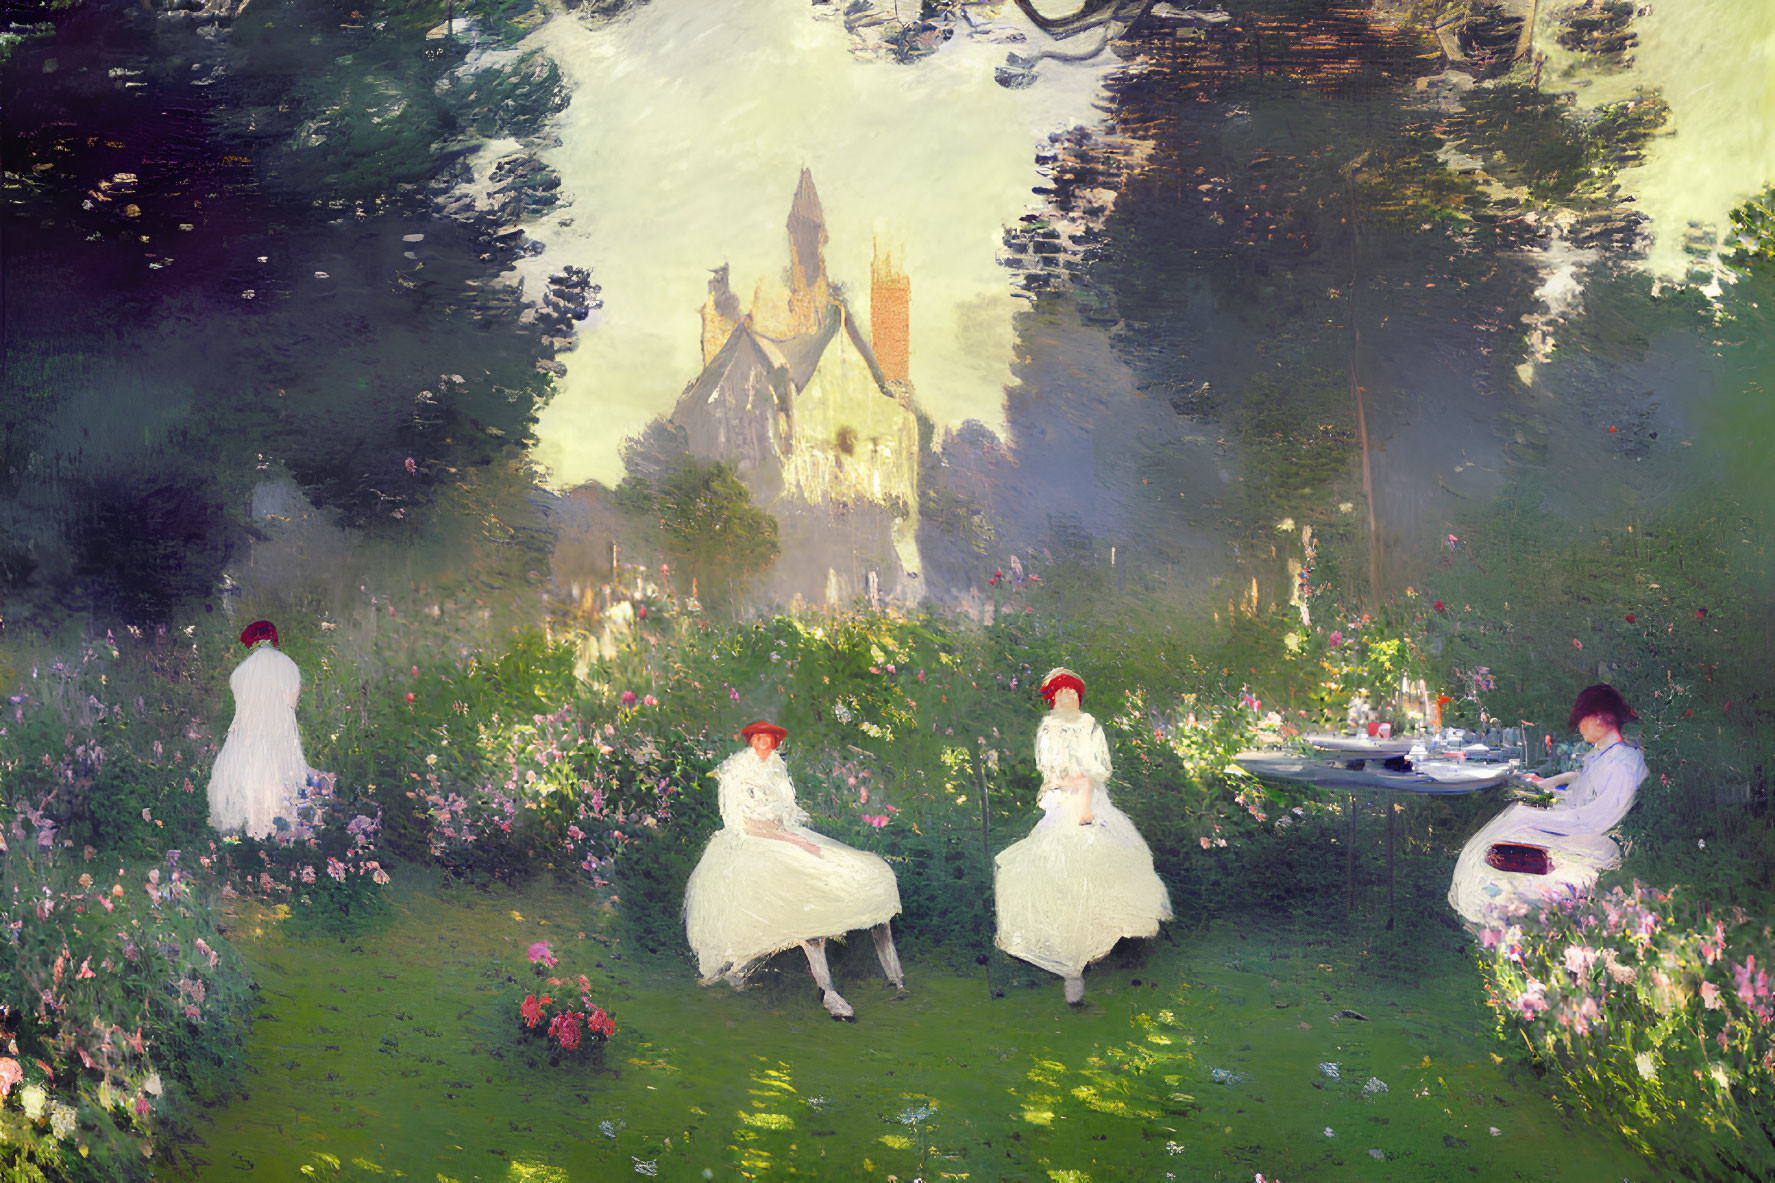 Impressionist-style painting of women in white dresses in garden with castle-like building